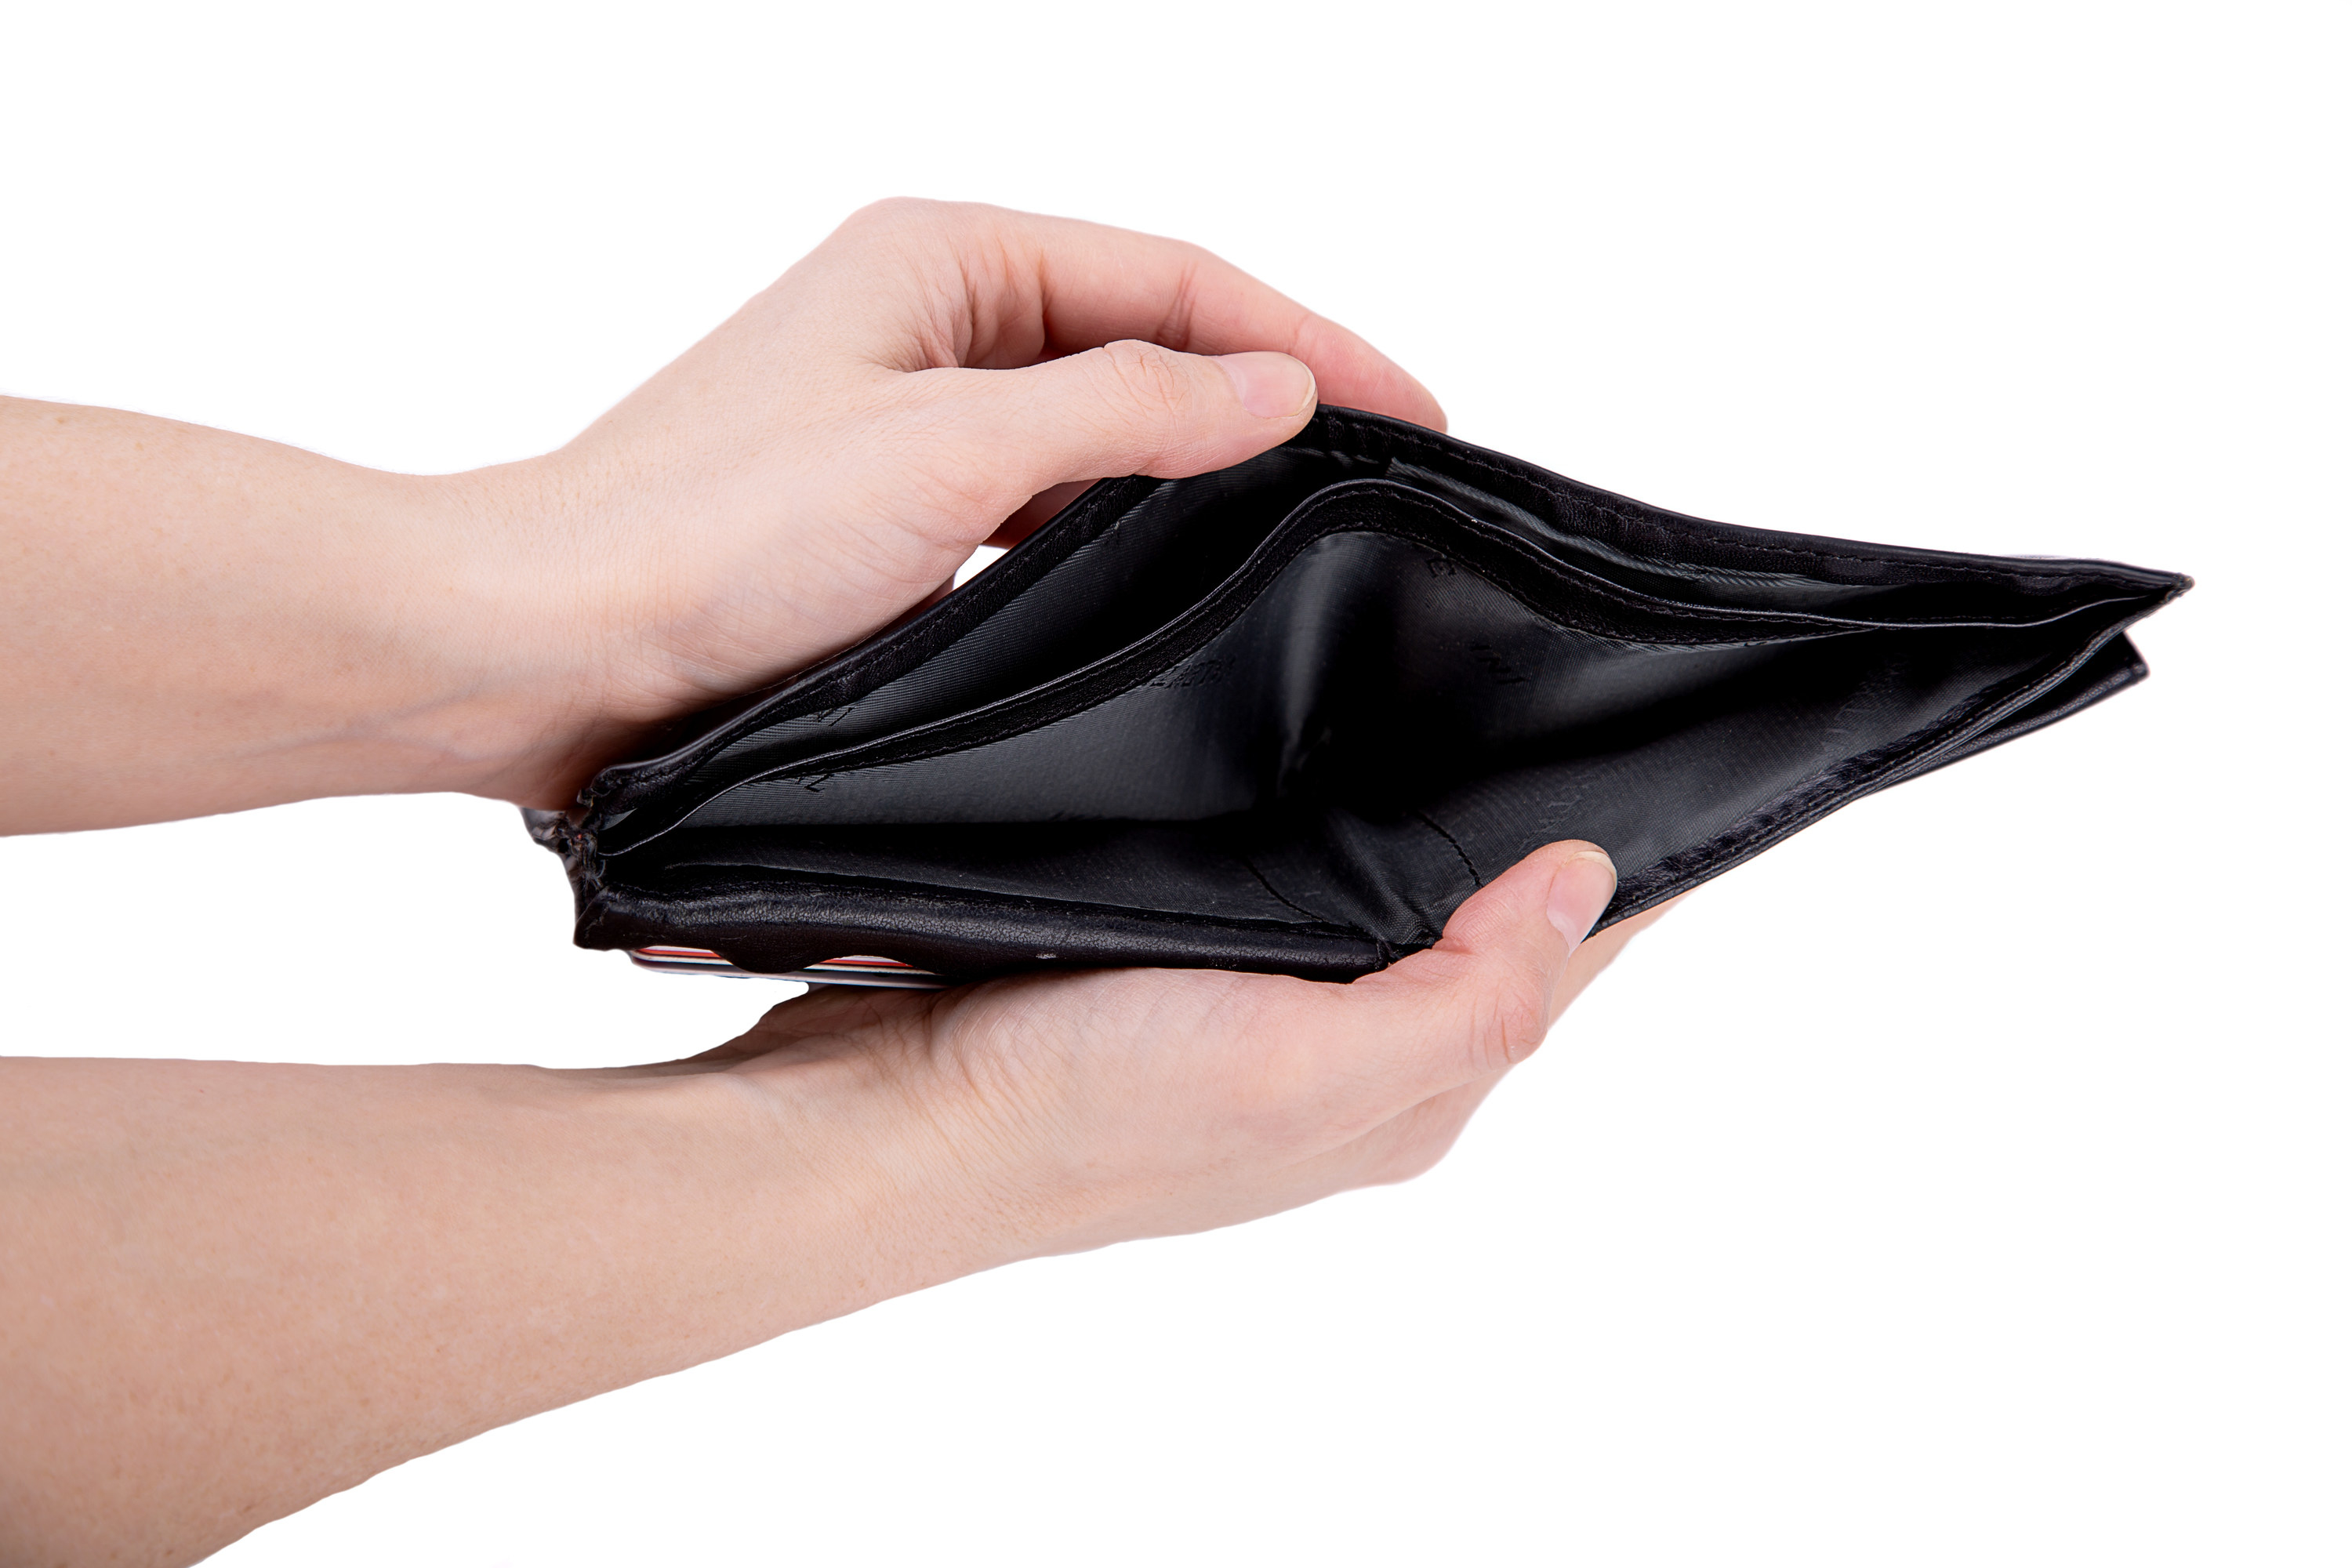 A man holds an empty open wallet in his hands on a white background close-up